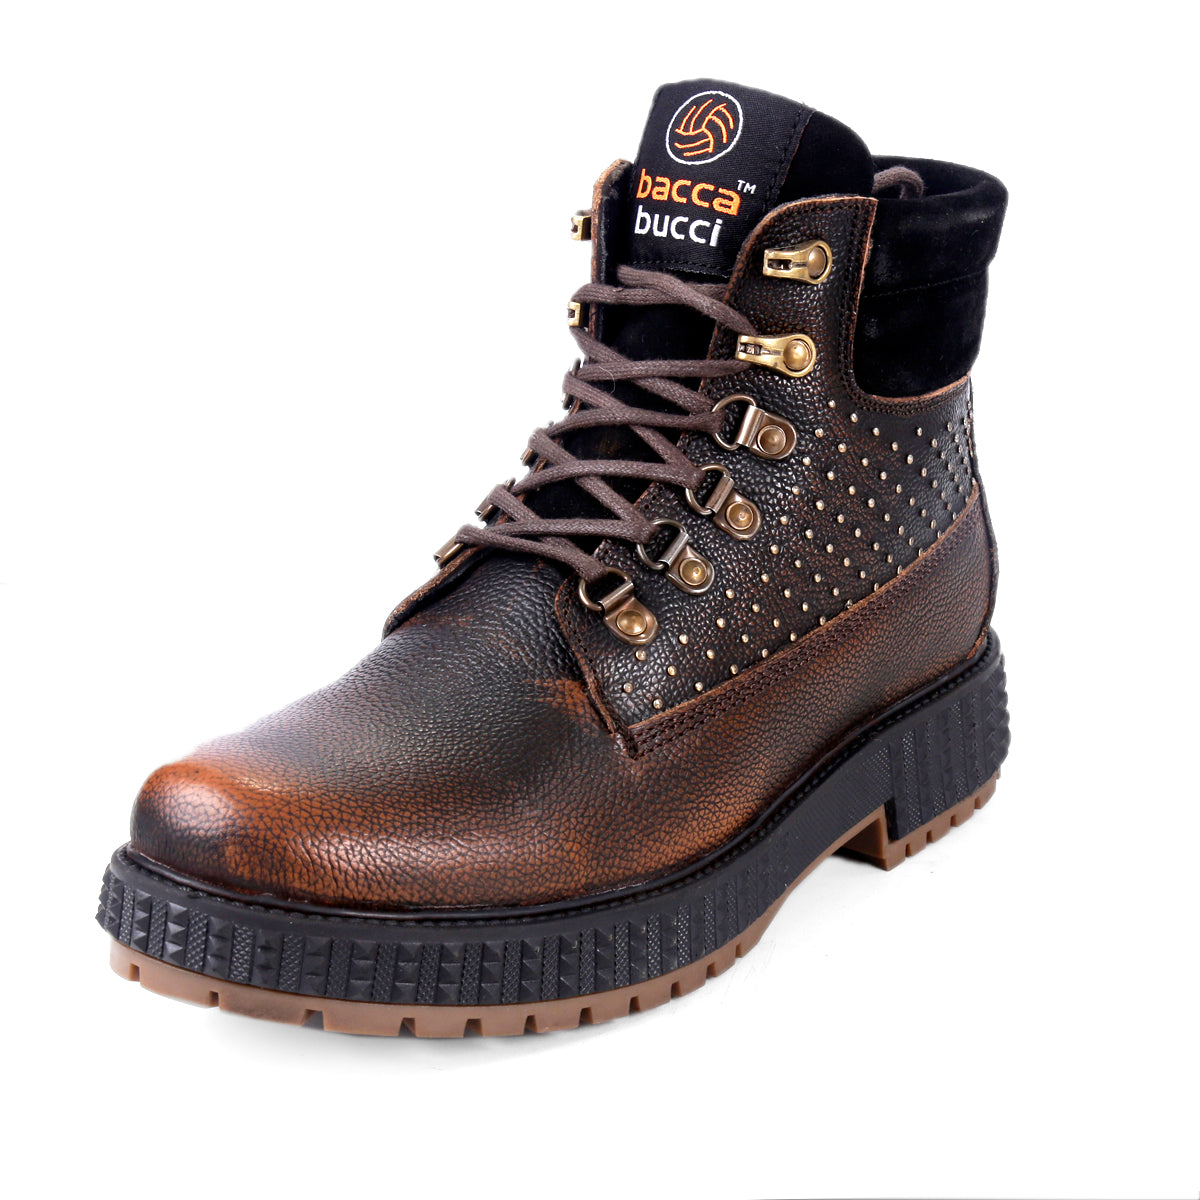 water resistant boots, leather boots for men, leather boots, brown leather boots